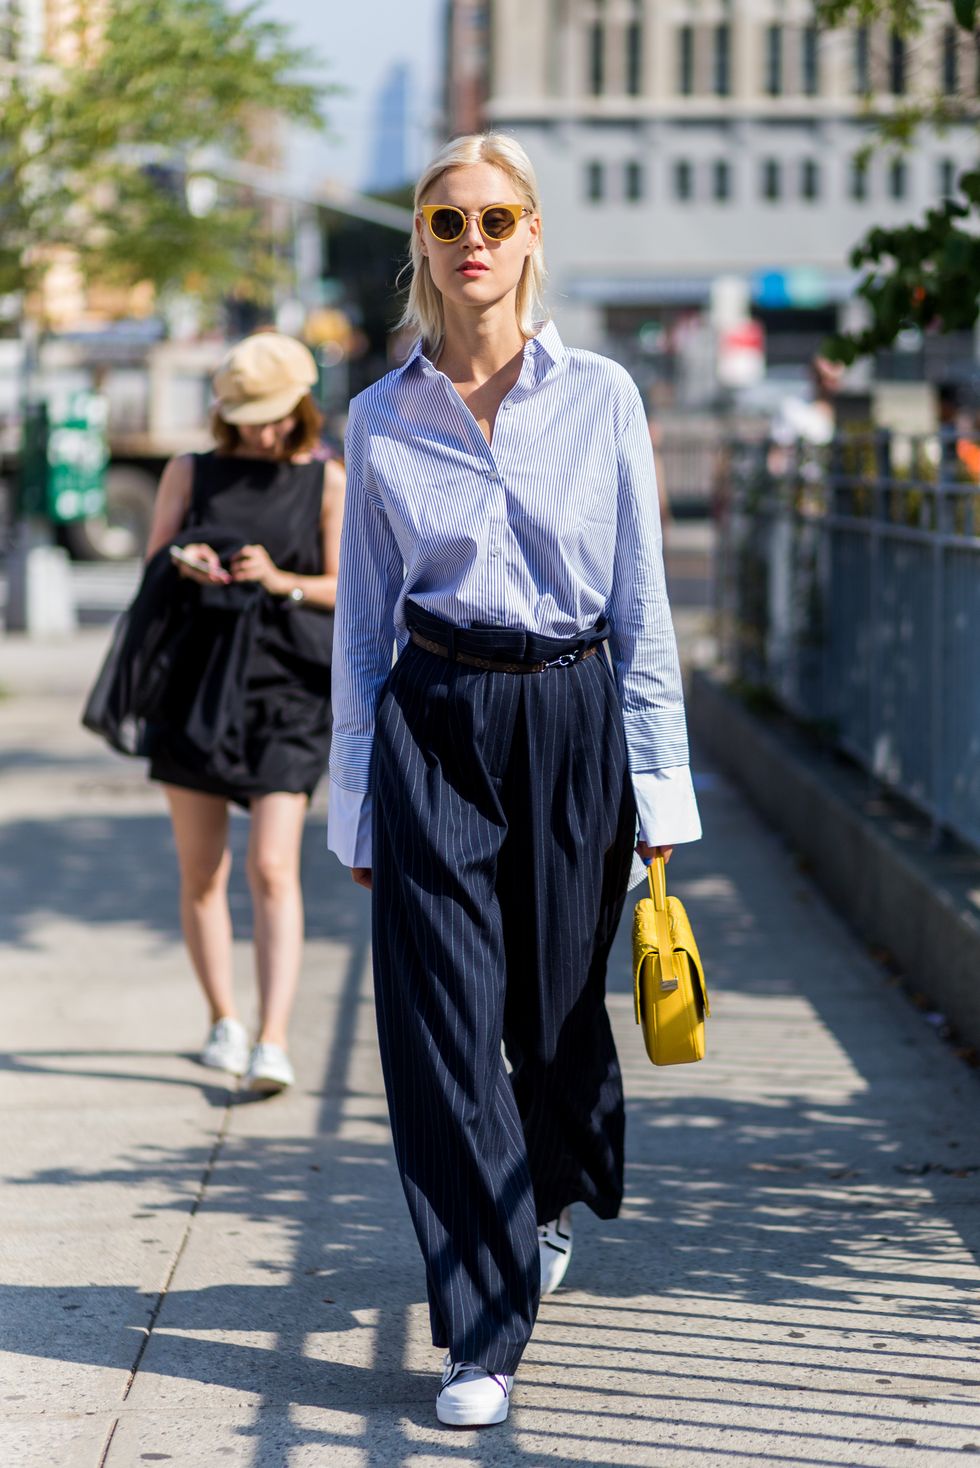 How To Dress For Work In A Heat Wave - Clothes To Wear Even When